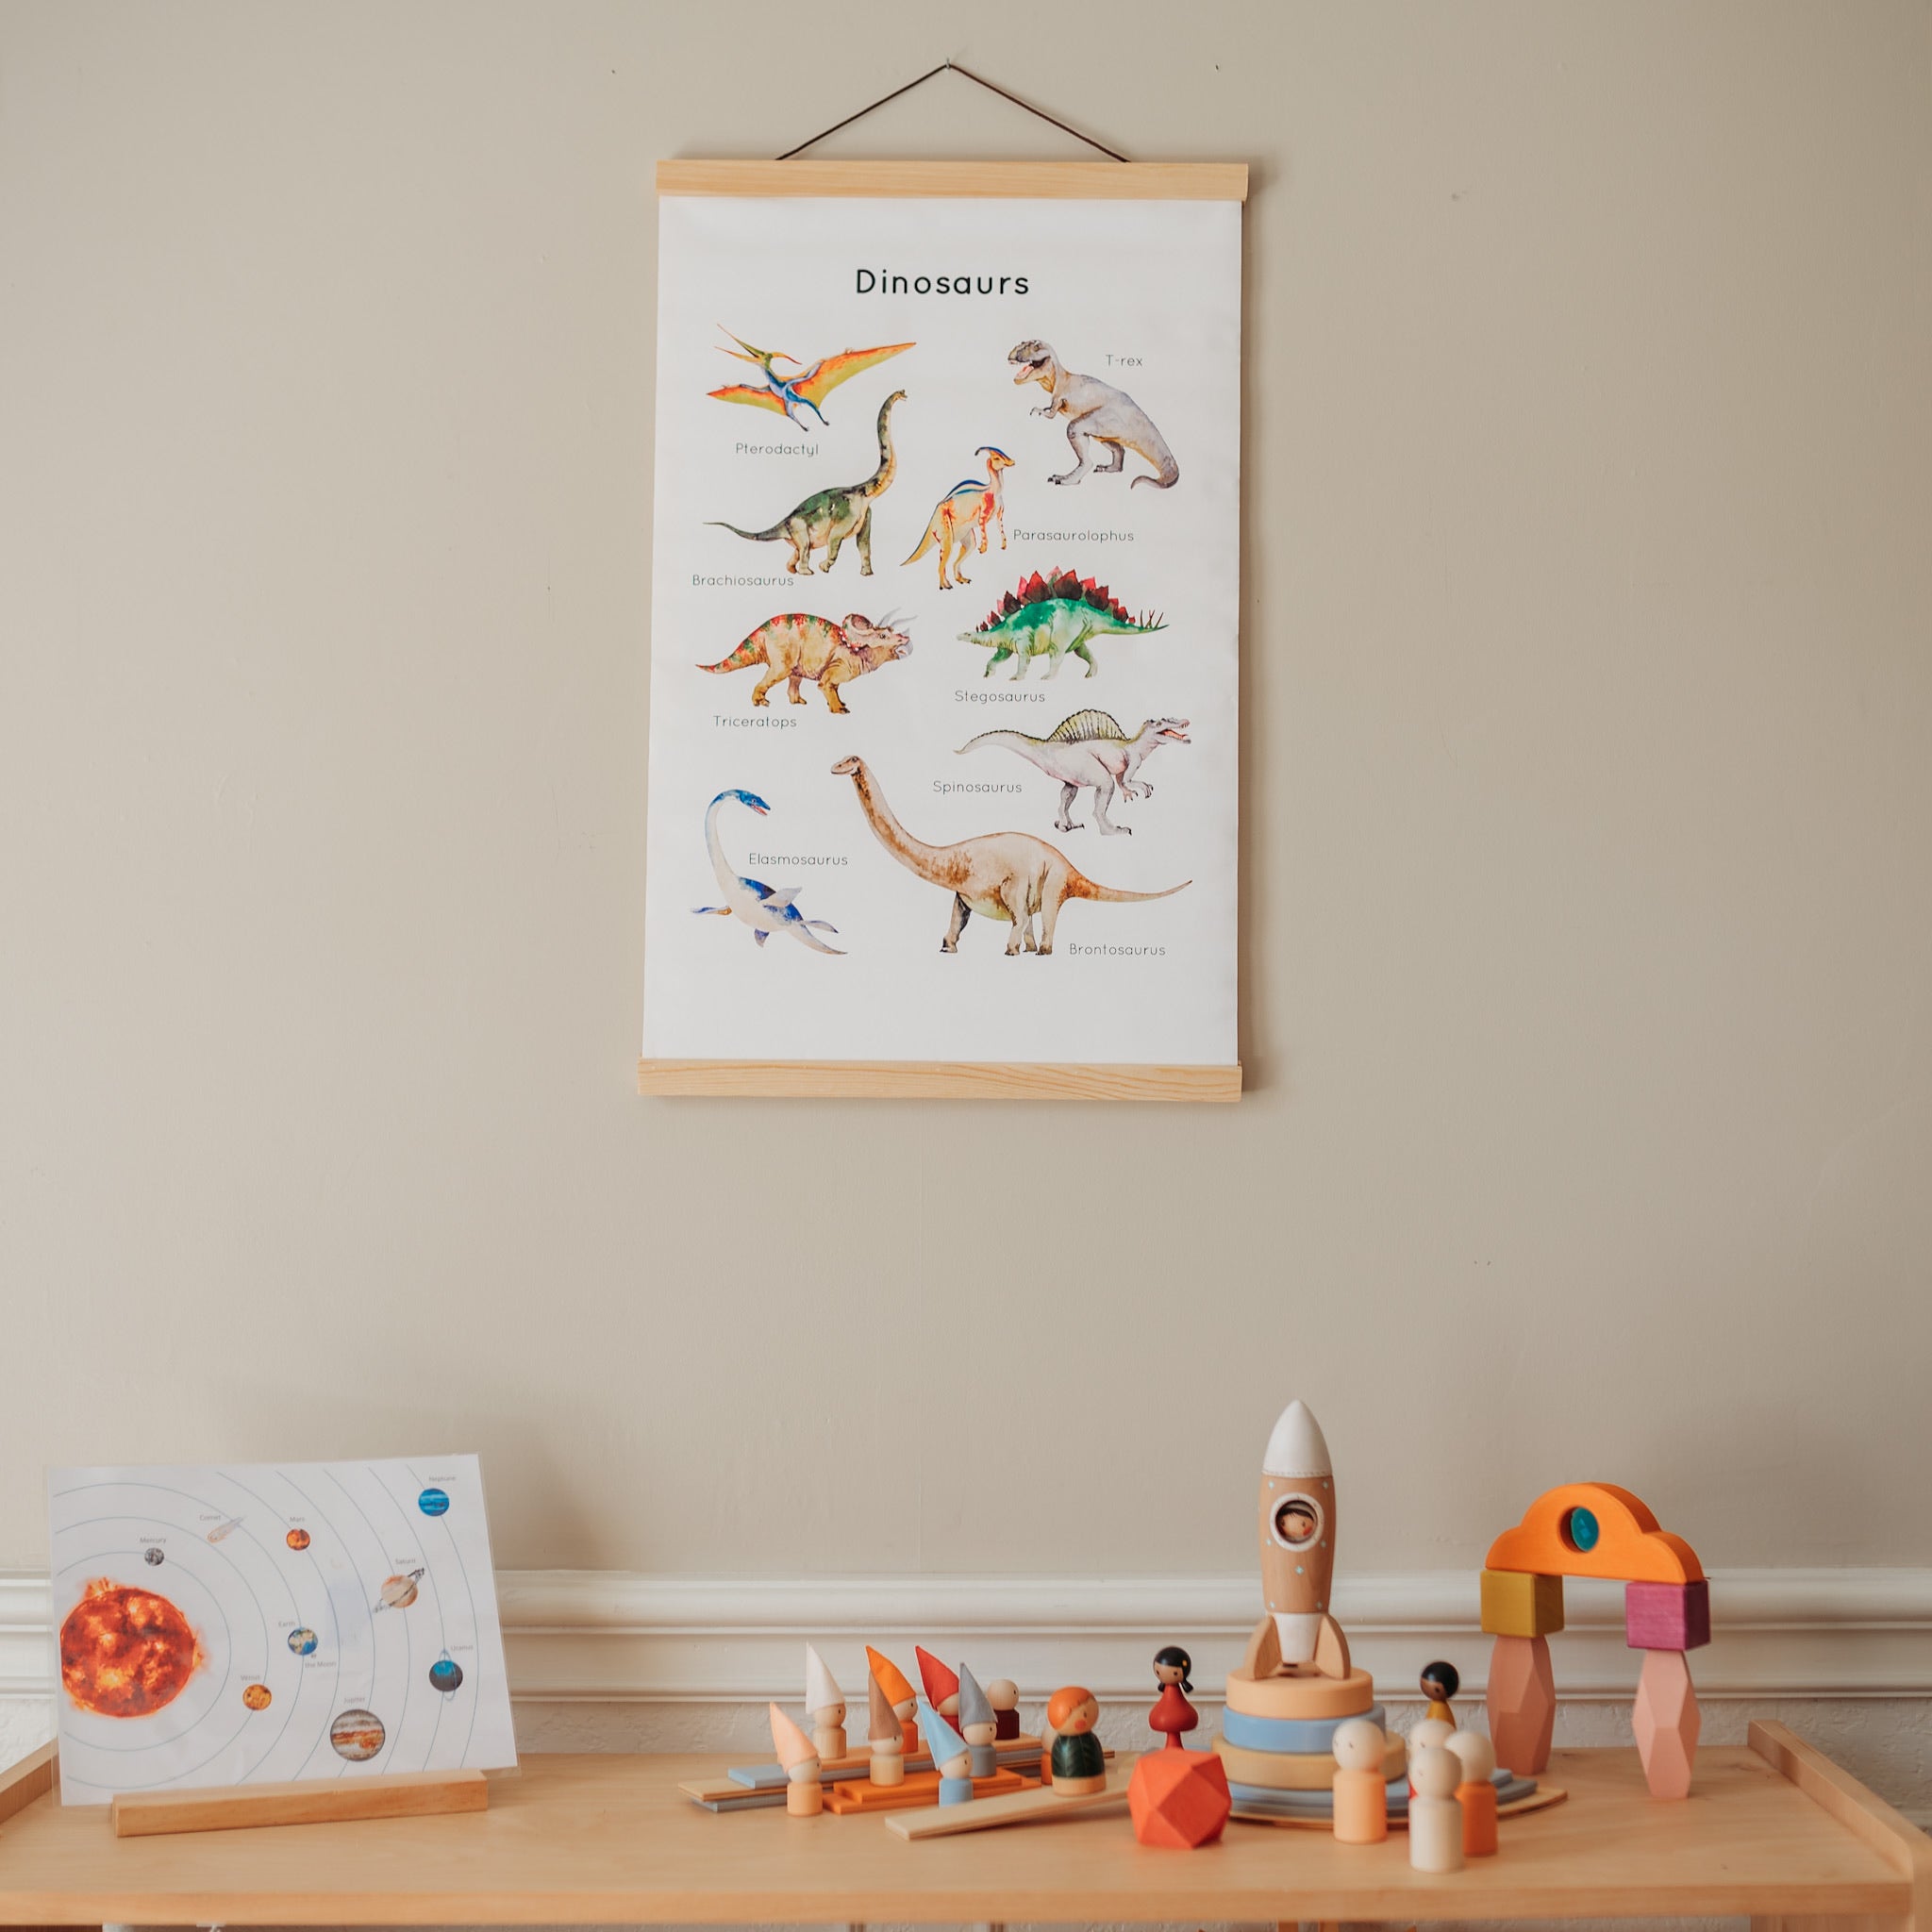 Dinosaur Poster (physical product)